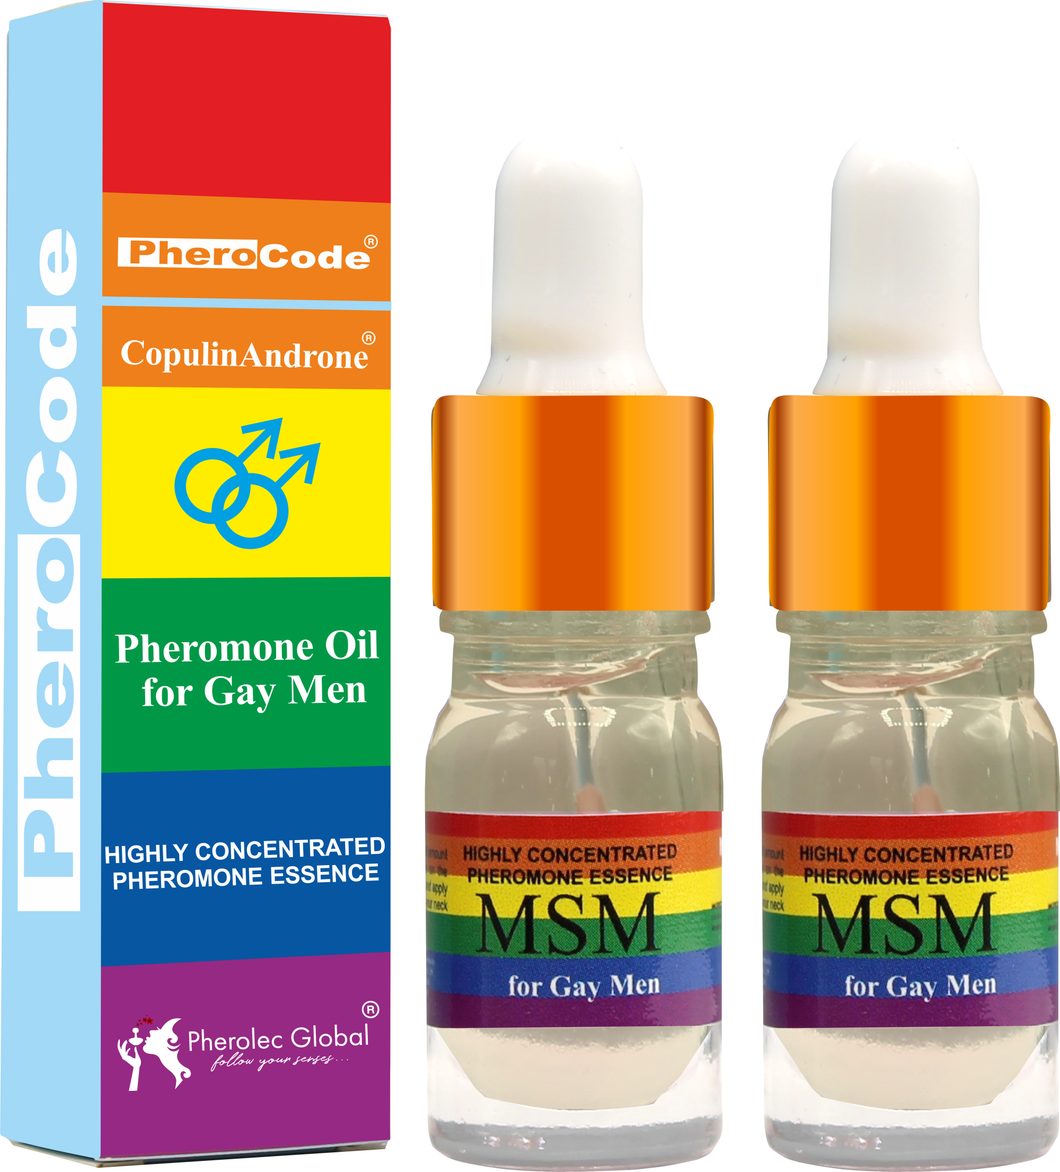 PheroCode CopulinAndrone® MSM Men Sex Men 100% Natural Very Strong High Quality Pheromone for Gay Men to Attract Gay Men Dropper 2x5ml